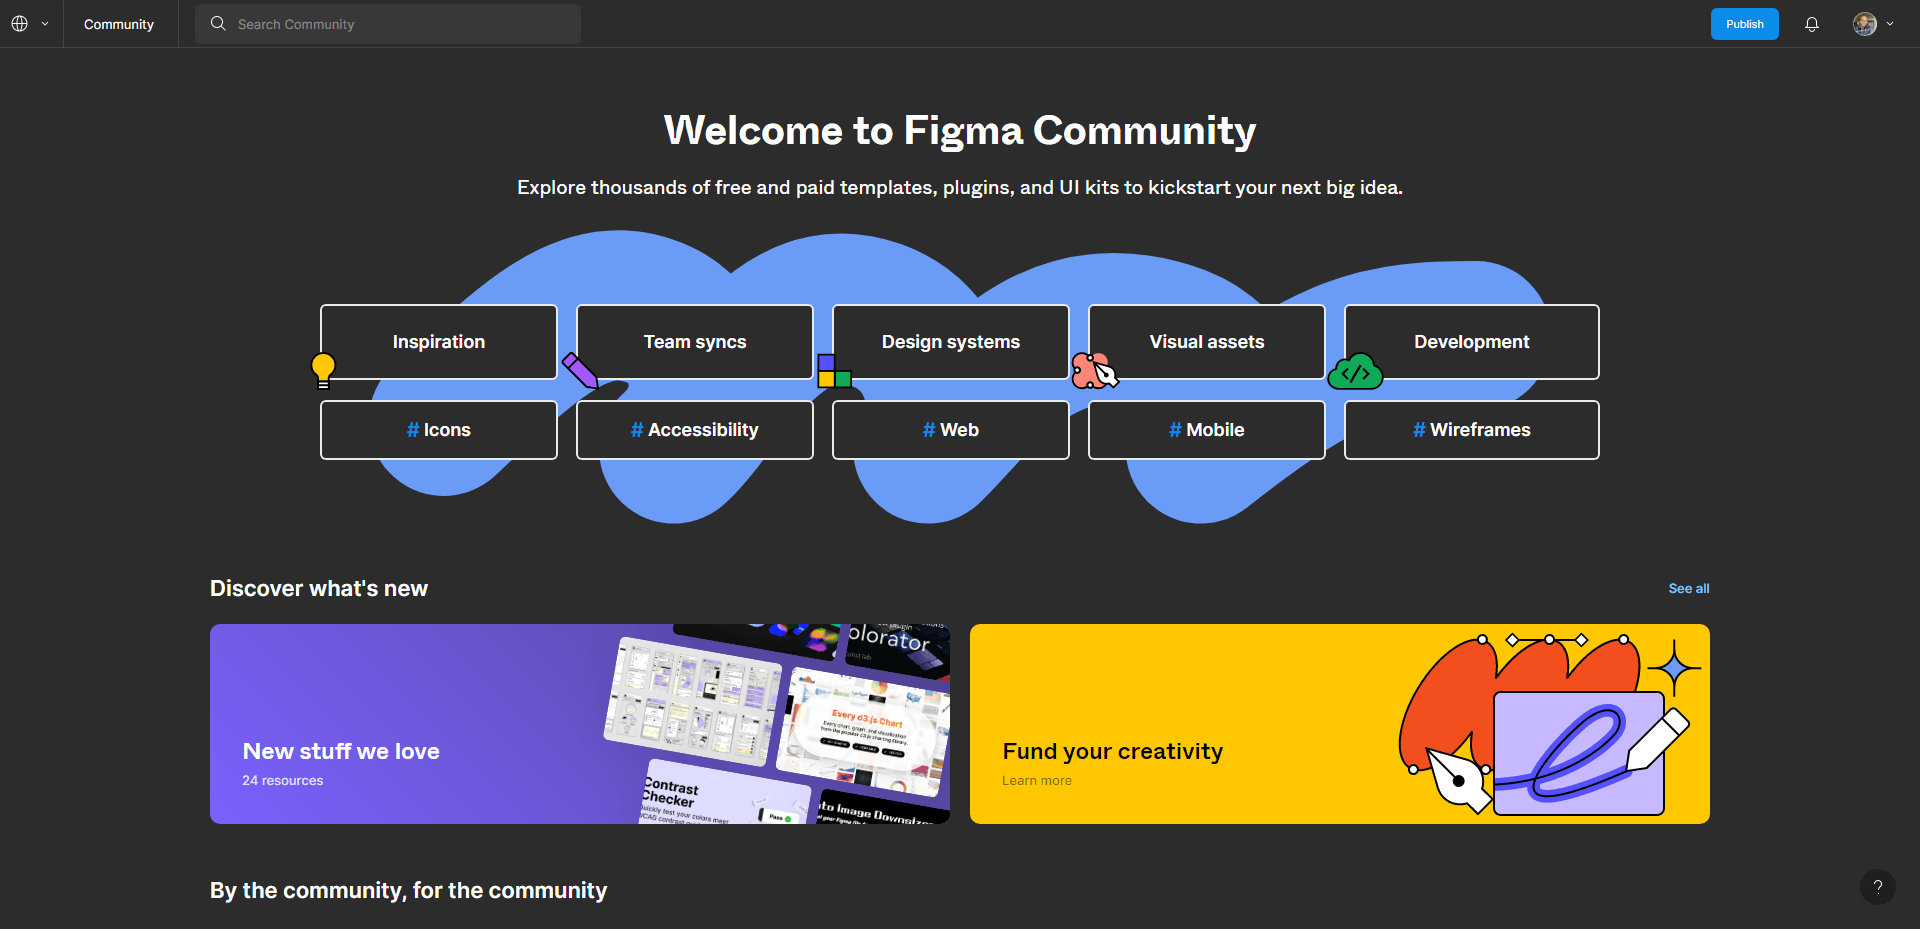 Welcome to Figma Community
